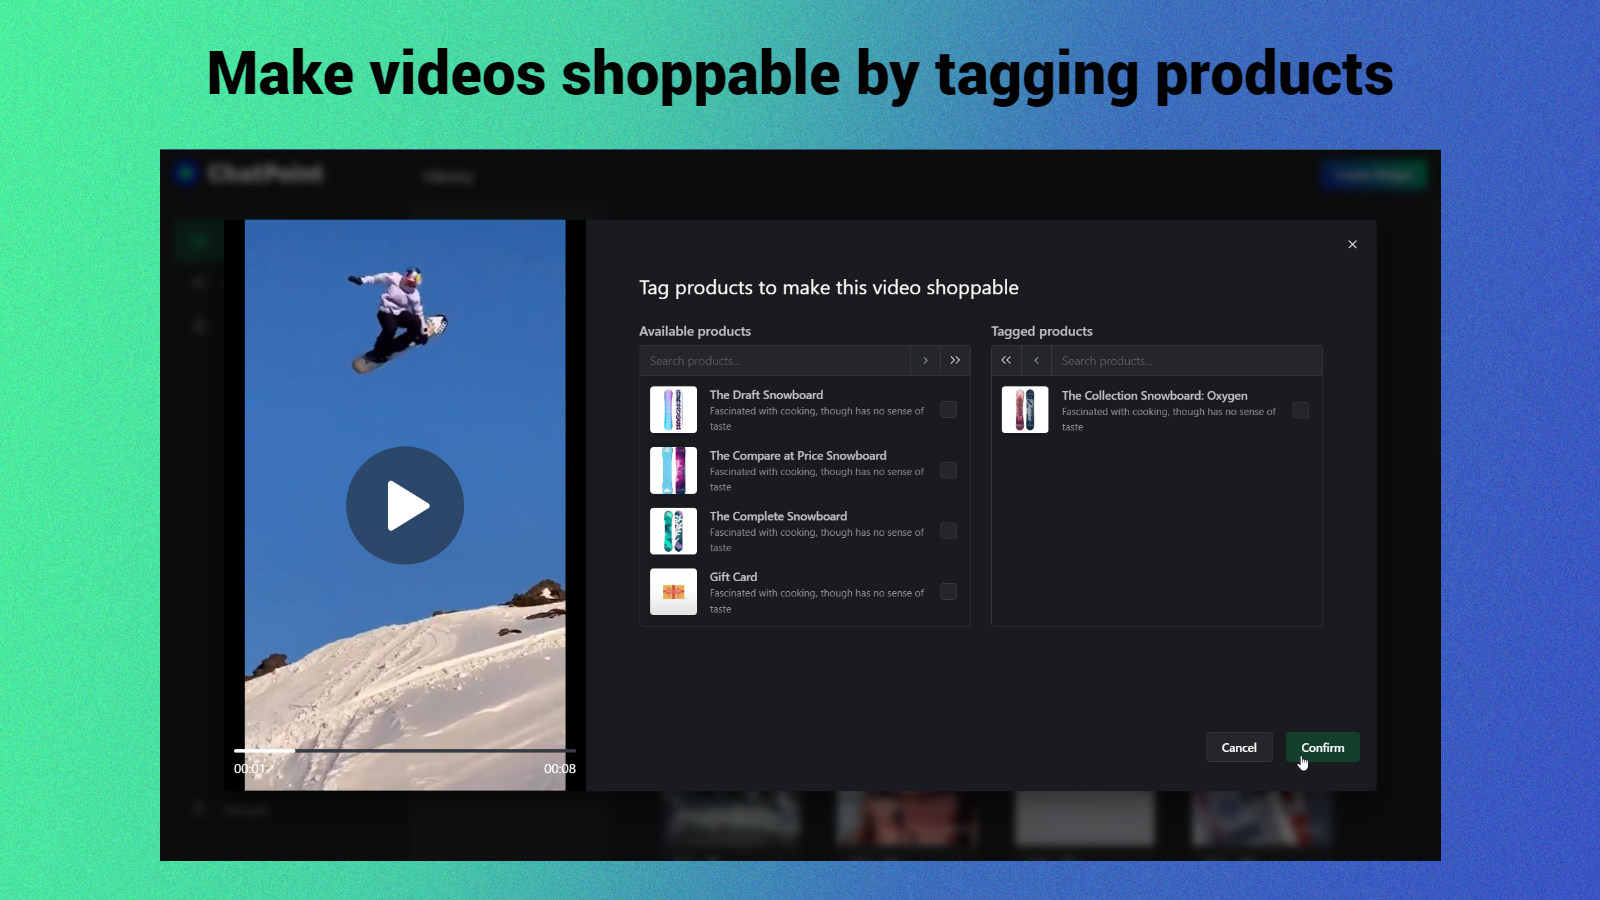 Tag videos with products to make them shoppable